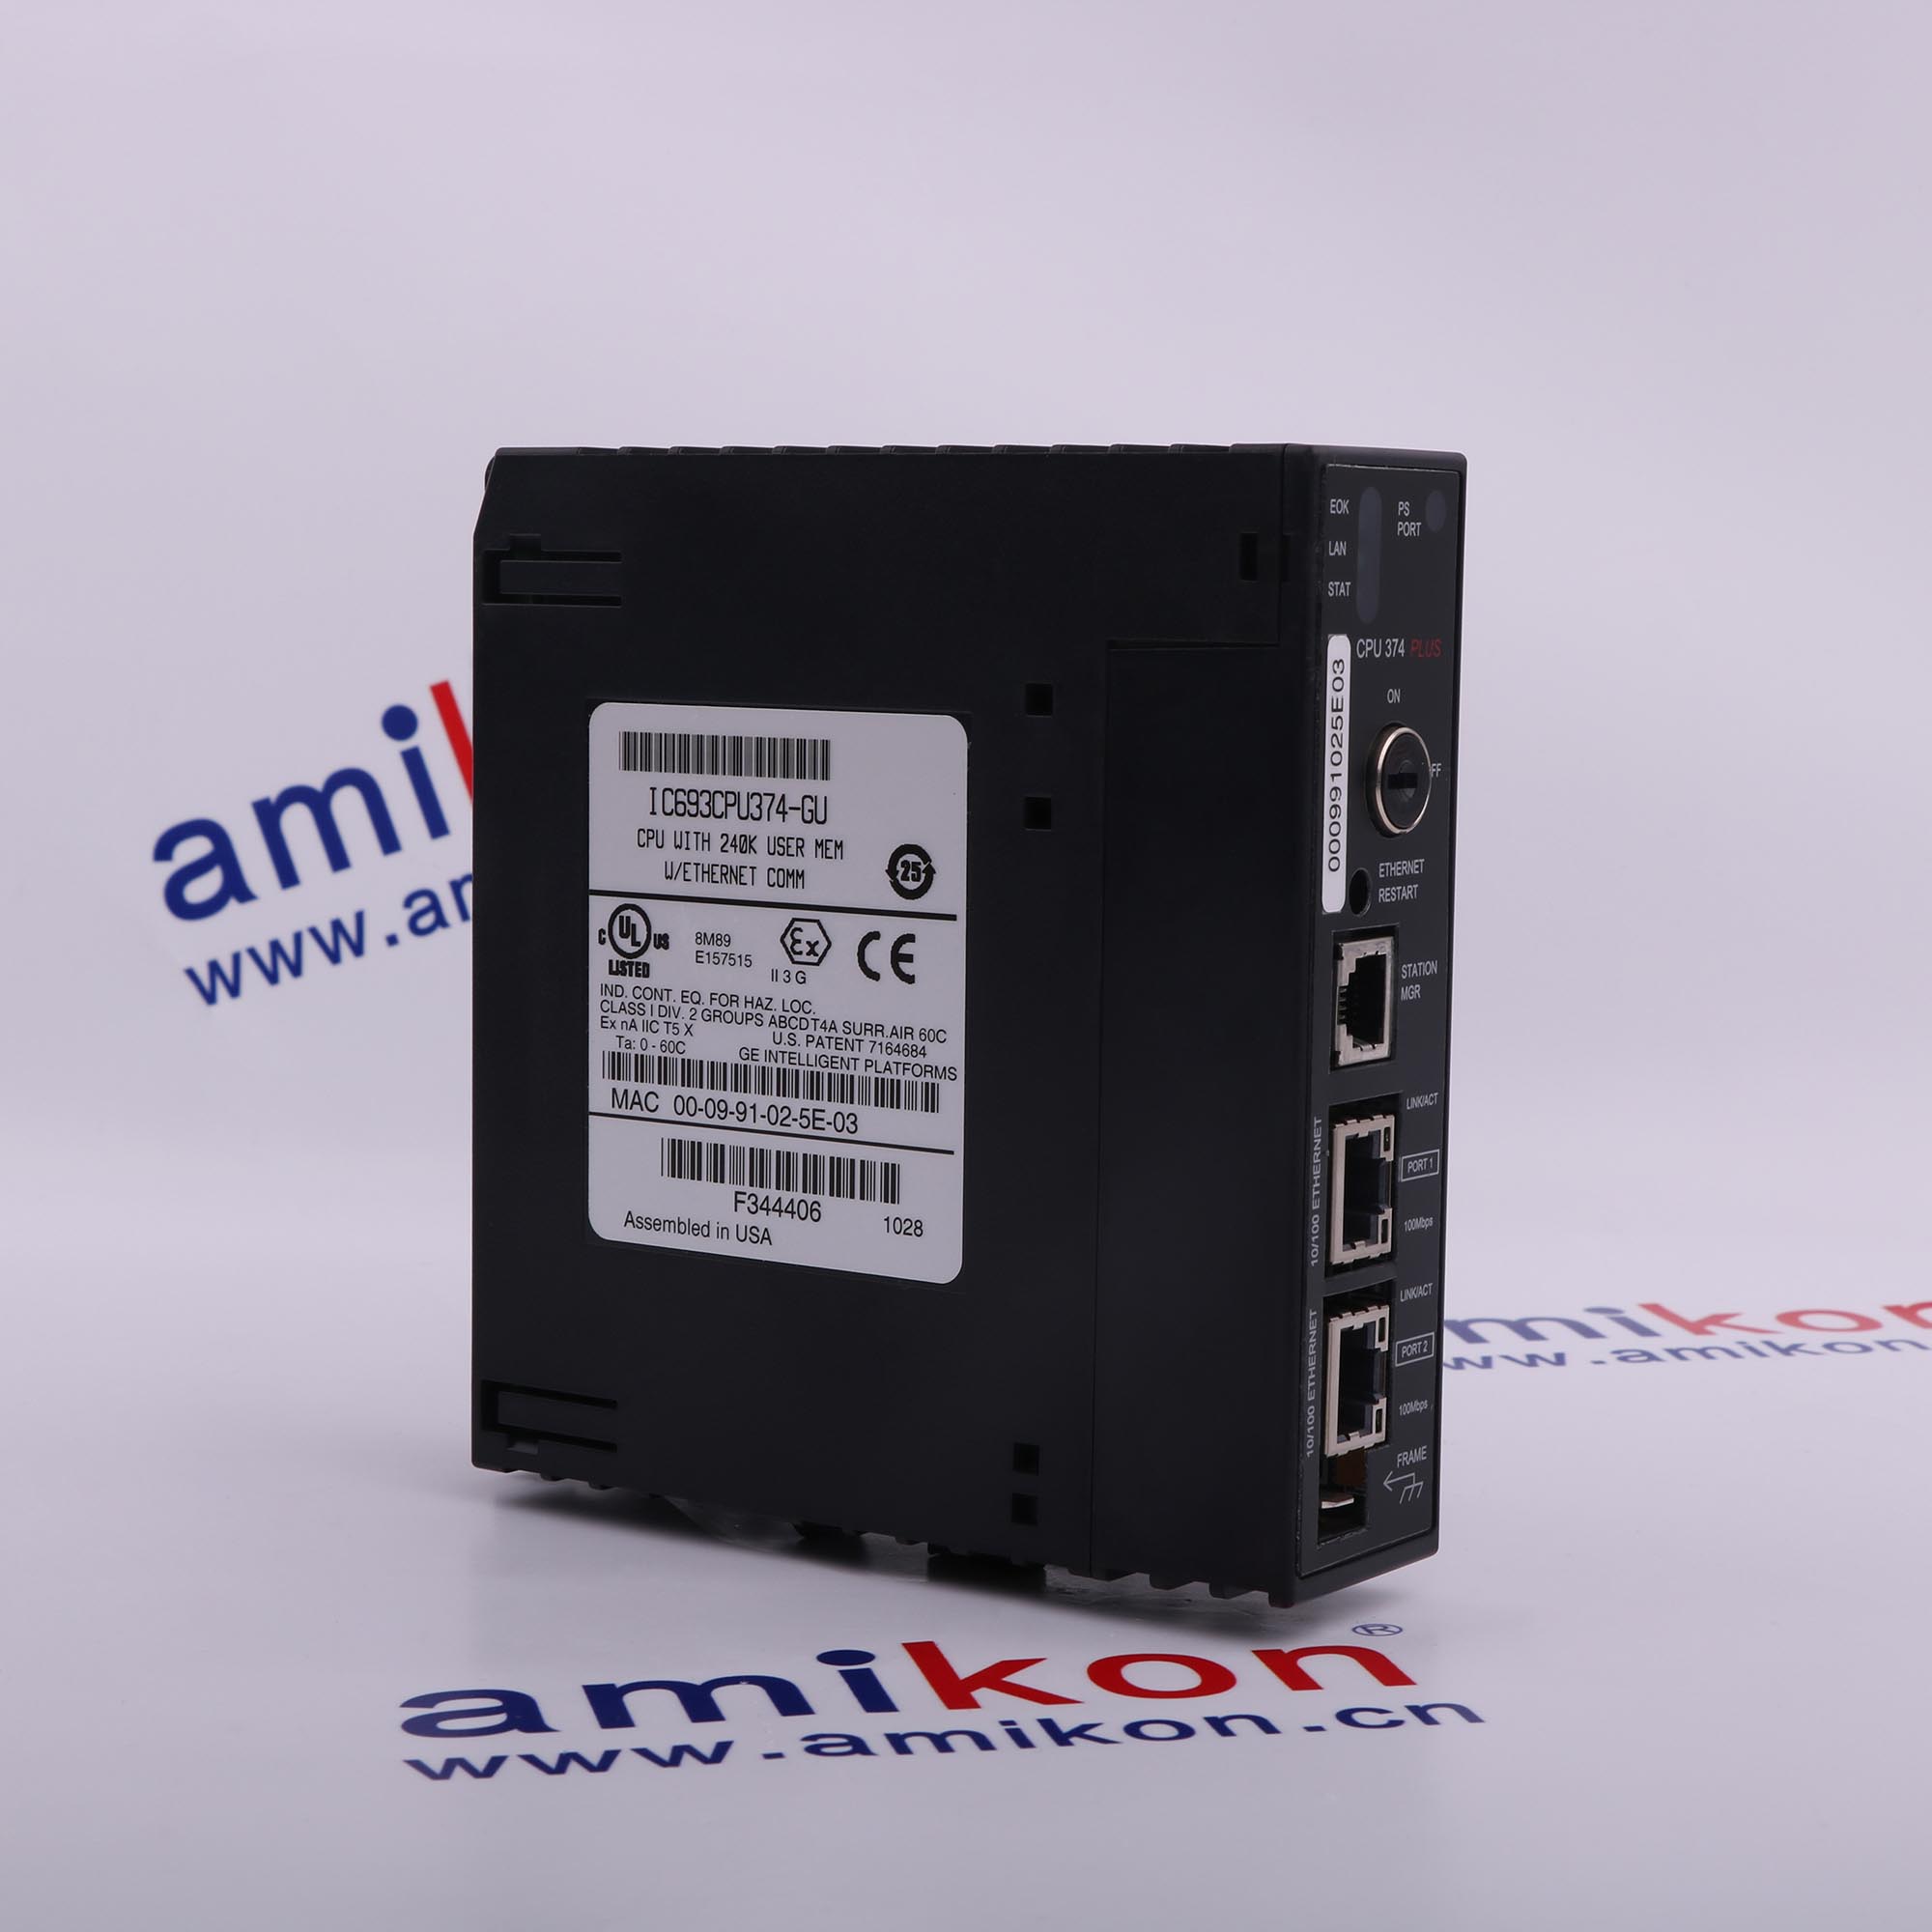 GE	DS200IMCPG1CCB	* Email: sales3@amikon.cn